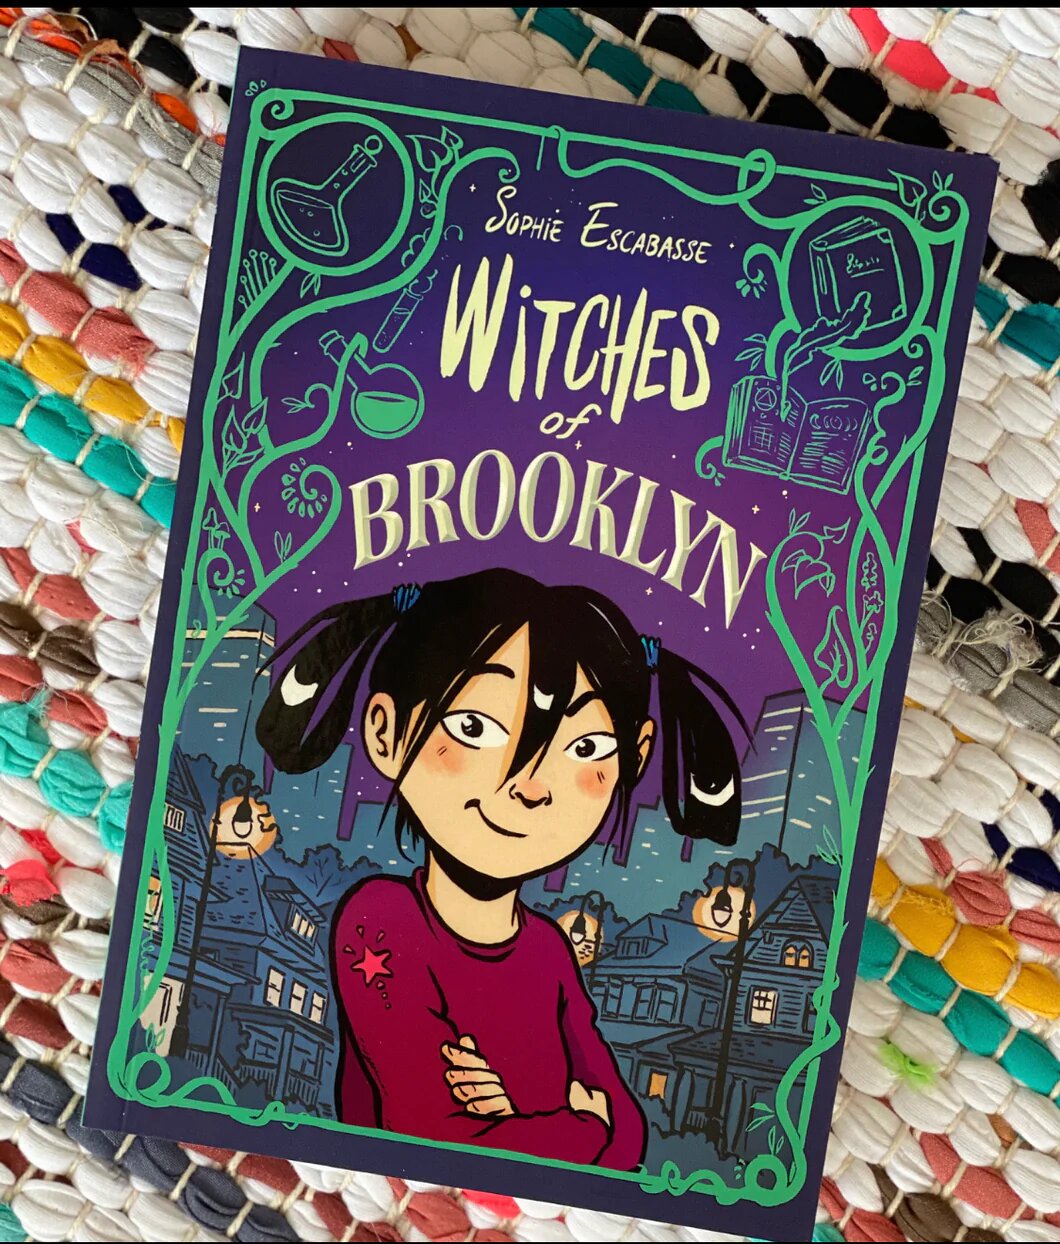 The newest edition in "The Witches of Brooklyn" series, "Spell of a Time," just arrived last month